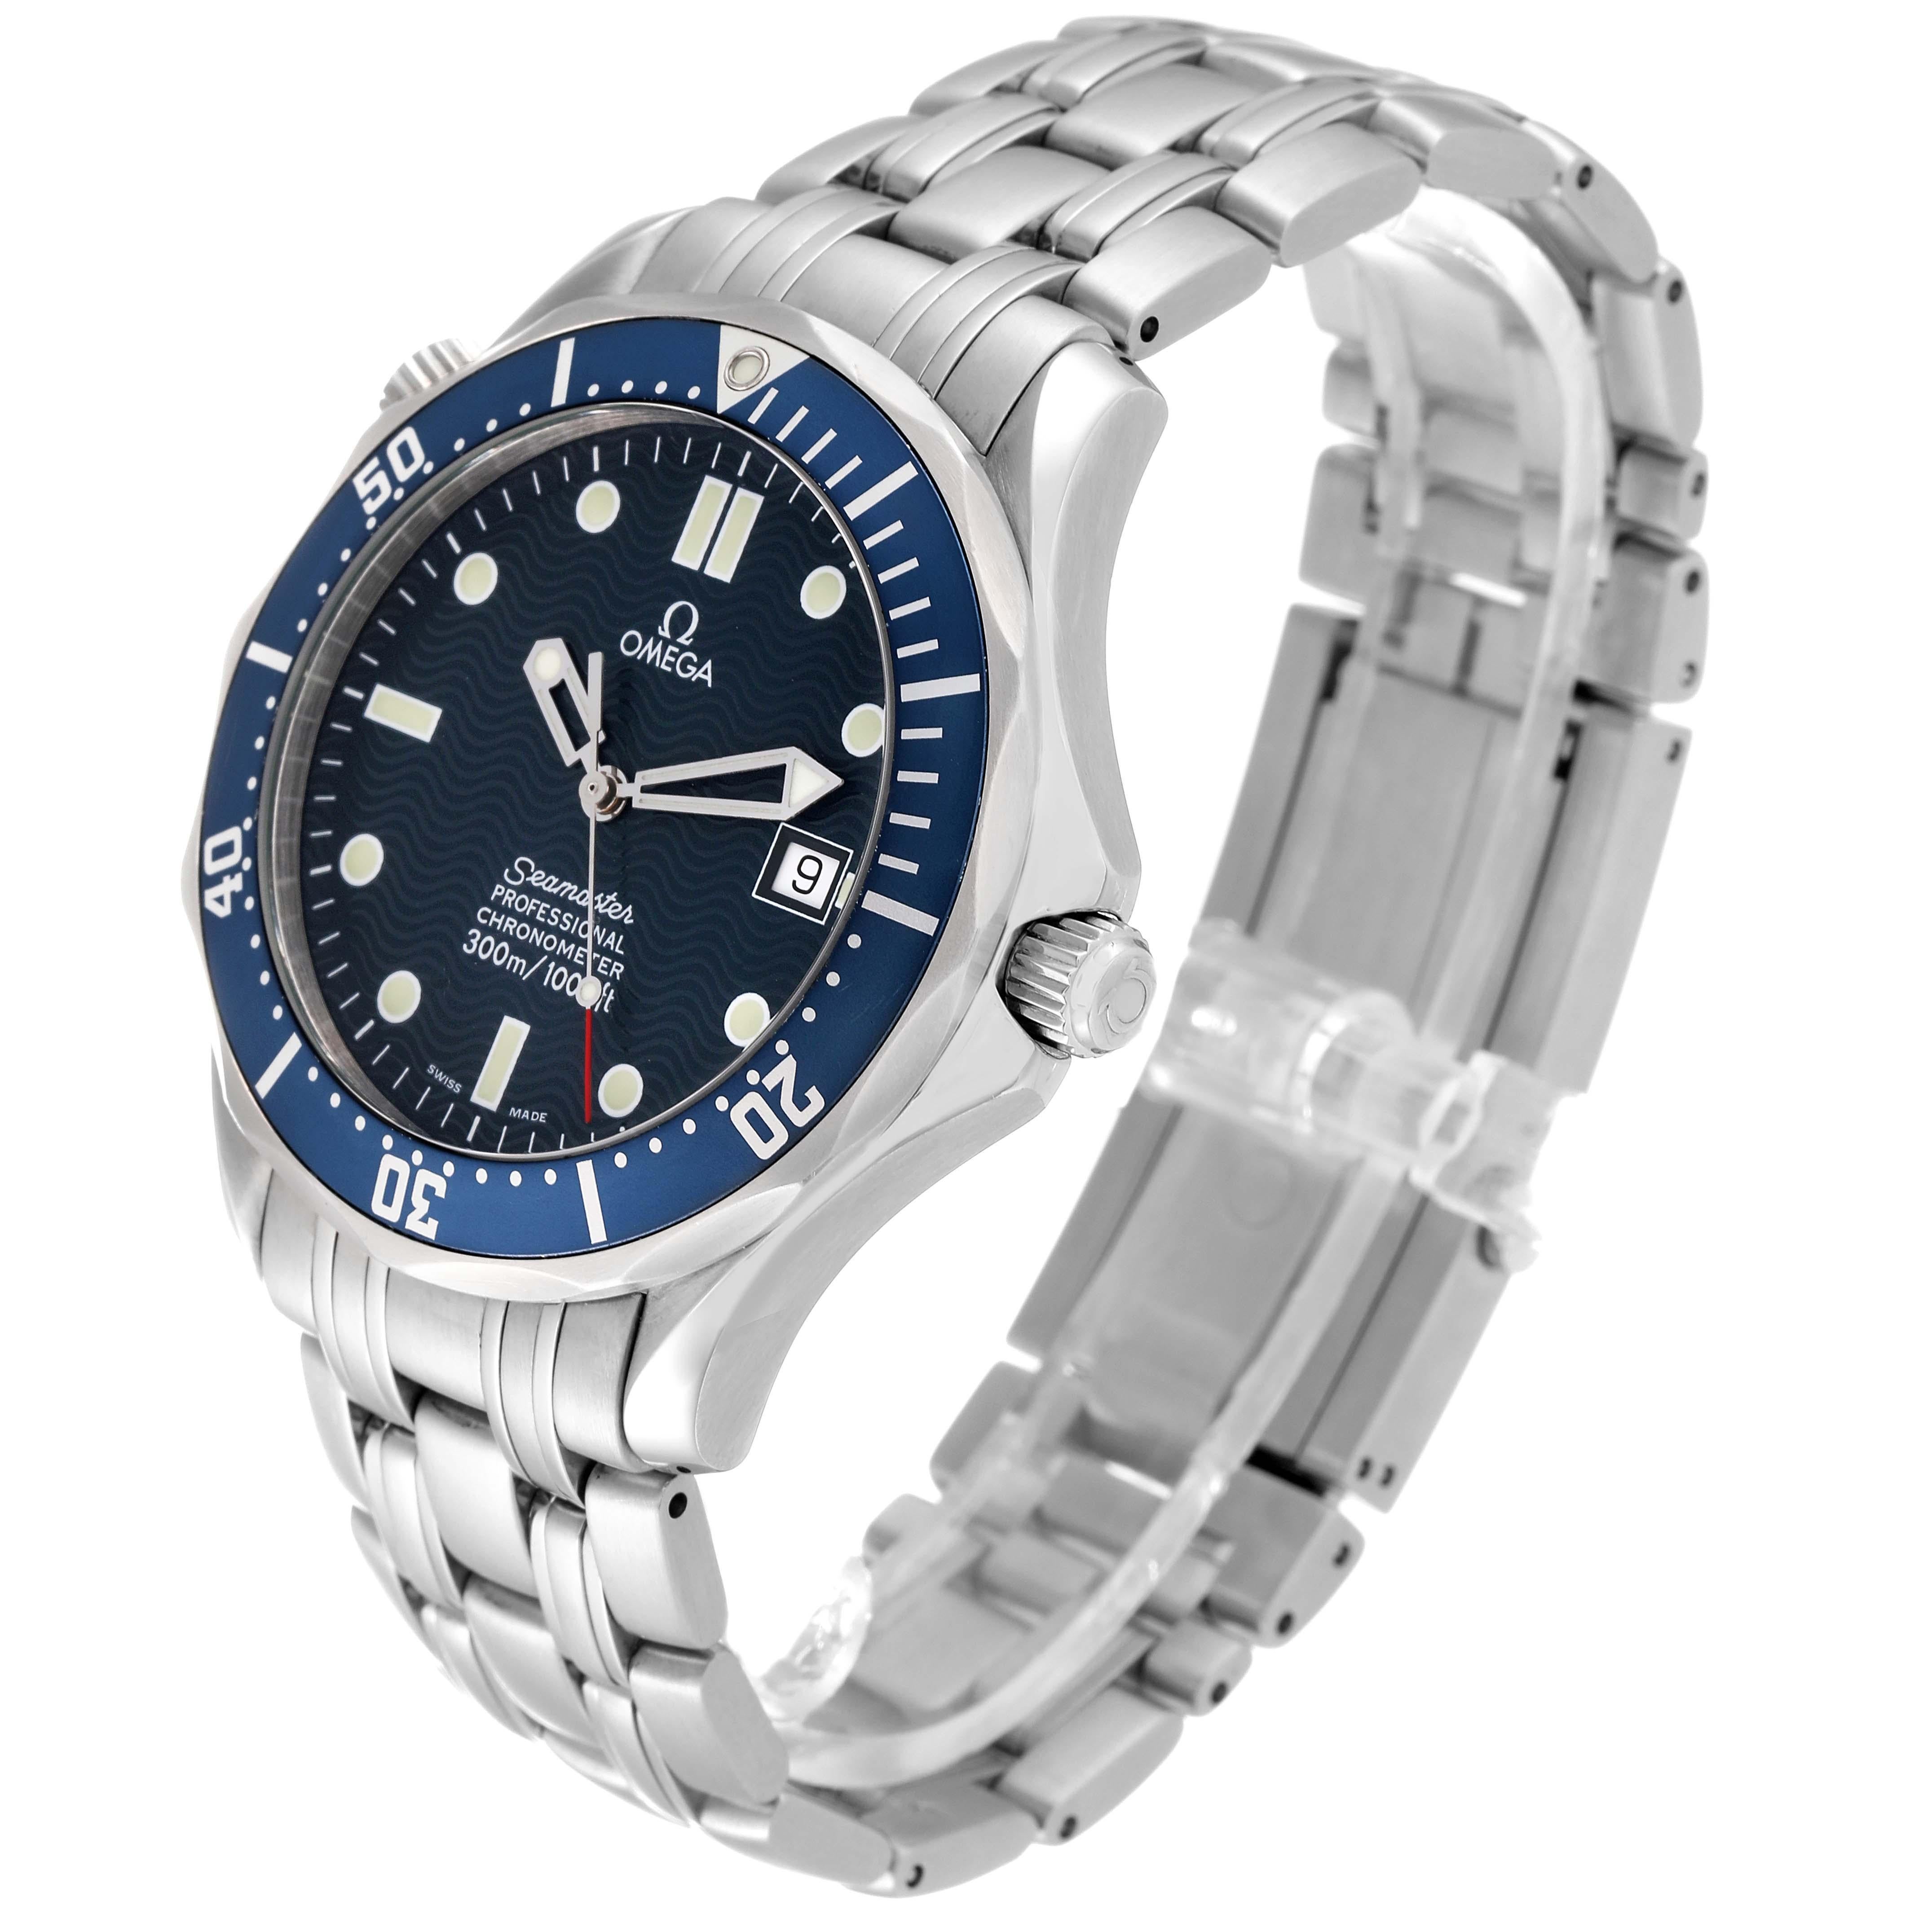 Omega Seamaster Diver 300mm Blue Dial Steel Mens Watch 2531.80.00. Automatic self-winding movement. Stainless steel case 41.0 mm in diameter. Omega logo on the crown. Helium escape valve at 10 o'clock. Blue unidirectional rotating bezel. Scratch